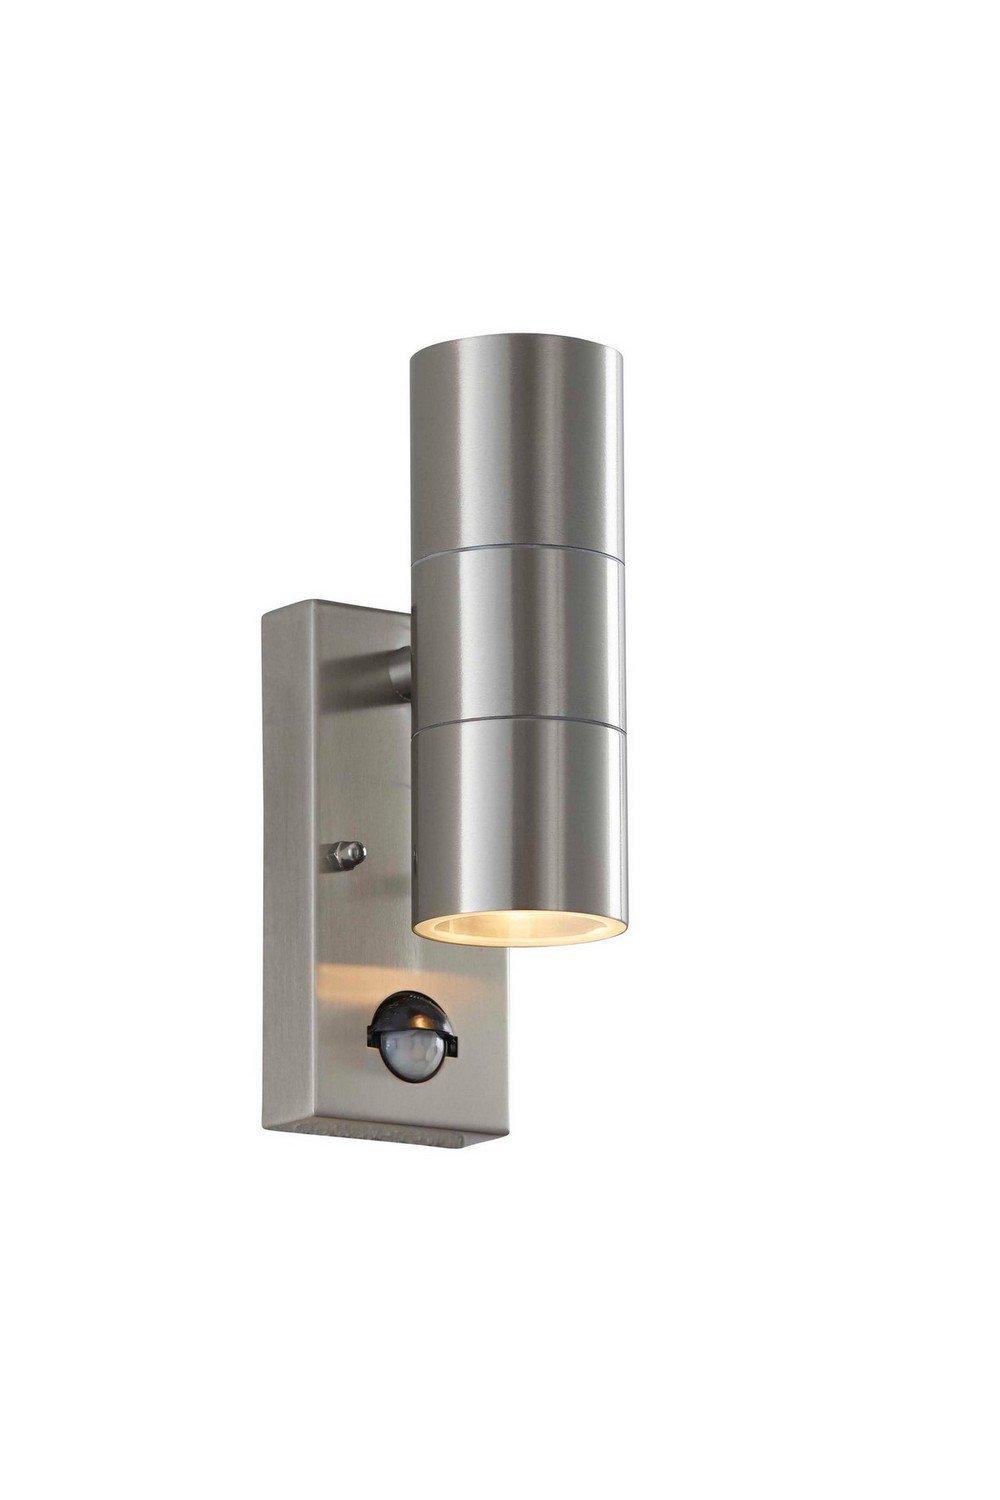 Canon PIR 2 Light Outdoor Up Down Wall Light Clear Glass Polished Stainless Steel IP44 GU10